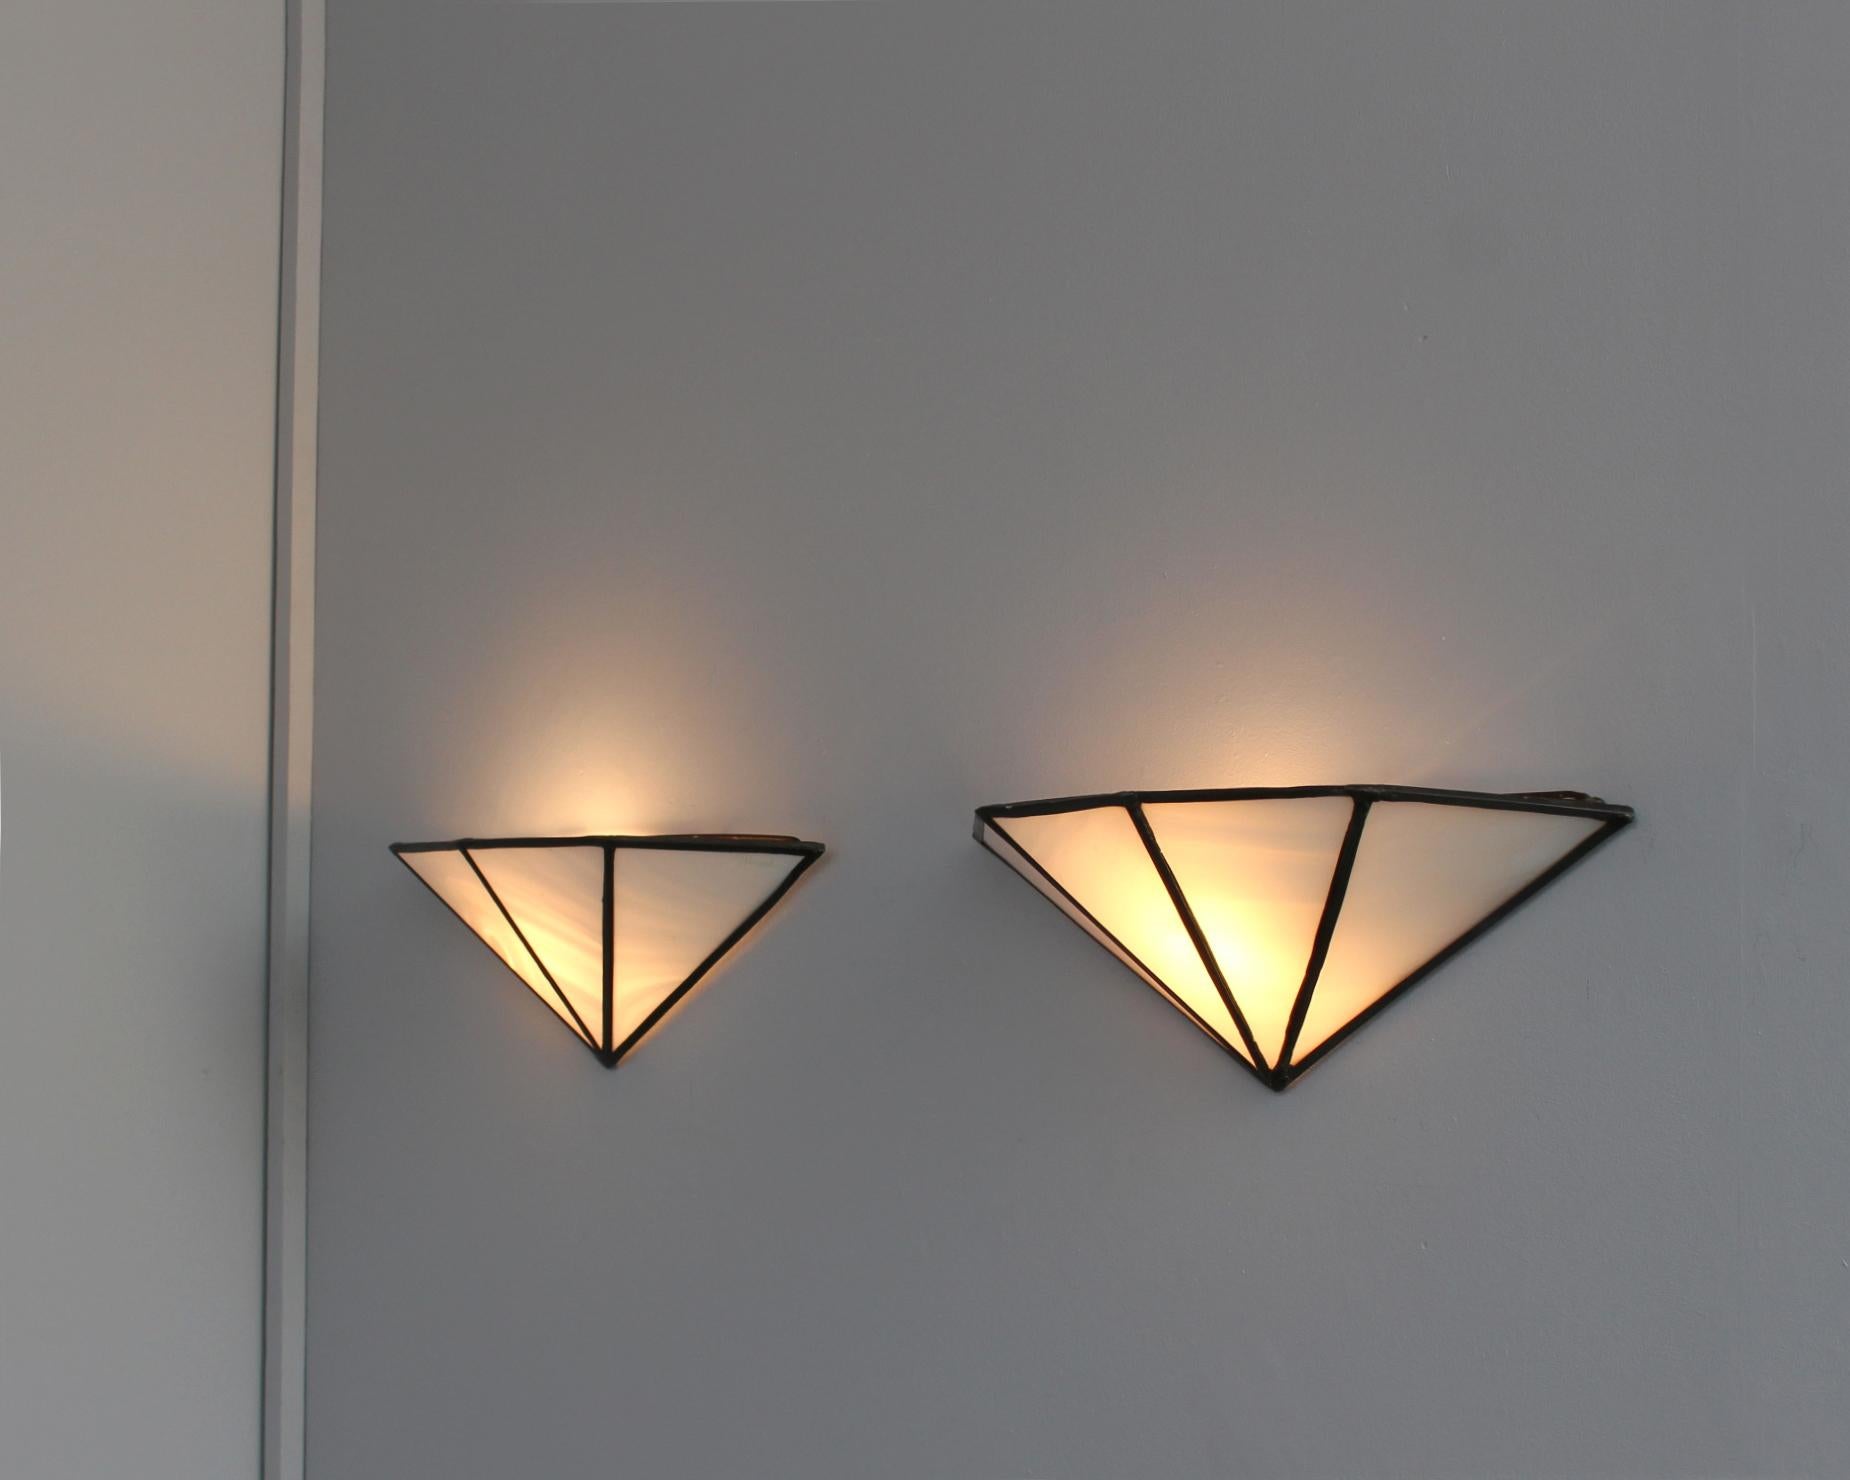 Rare Pair of French 1920s Wall Lights by Jean Perzel For Sale 6